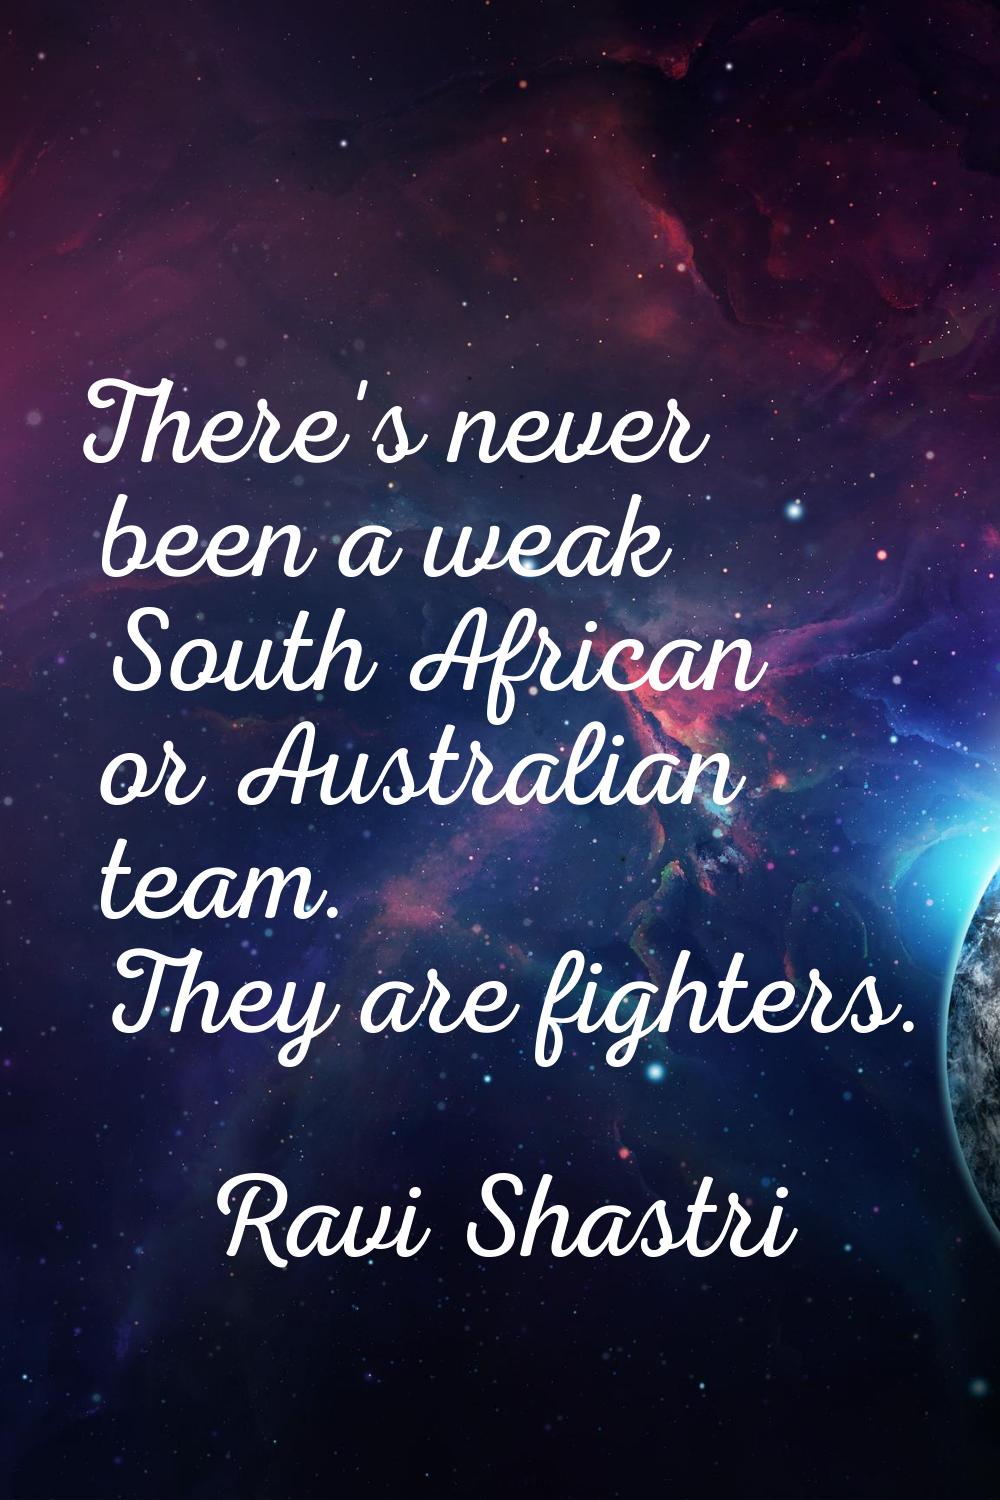 There's never been a weak South African or Australian team. They are fighters.